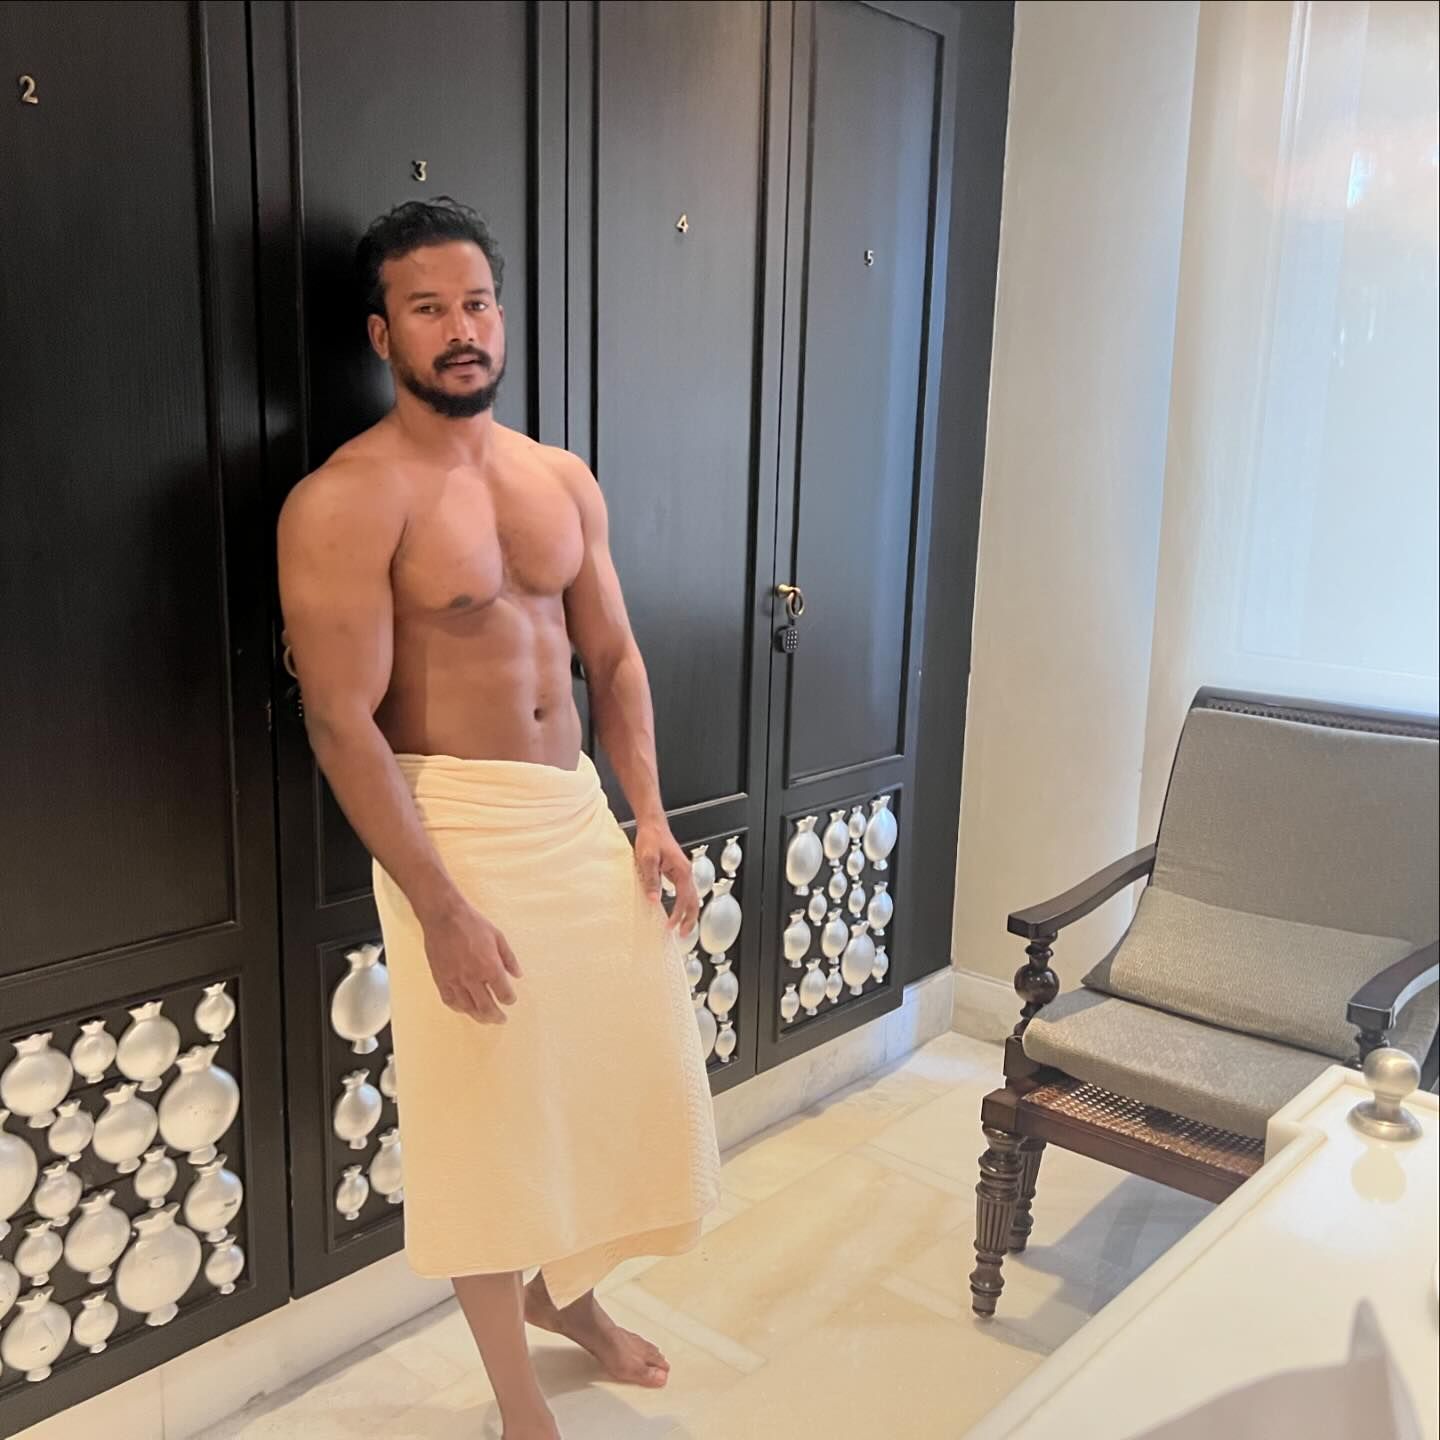 Too Hot Today Is 🥵🥵 Just Done shower 🙈😍✨
.
.
.
.
.
@raj.amen #fitnessmodel #lifestyle #fashionmodel #bold #shoot #naturephotography #indianmen #towel #oftheday